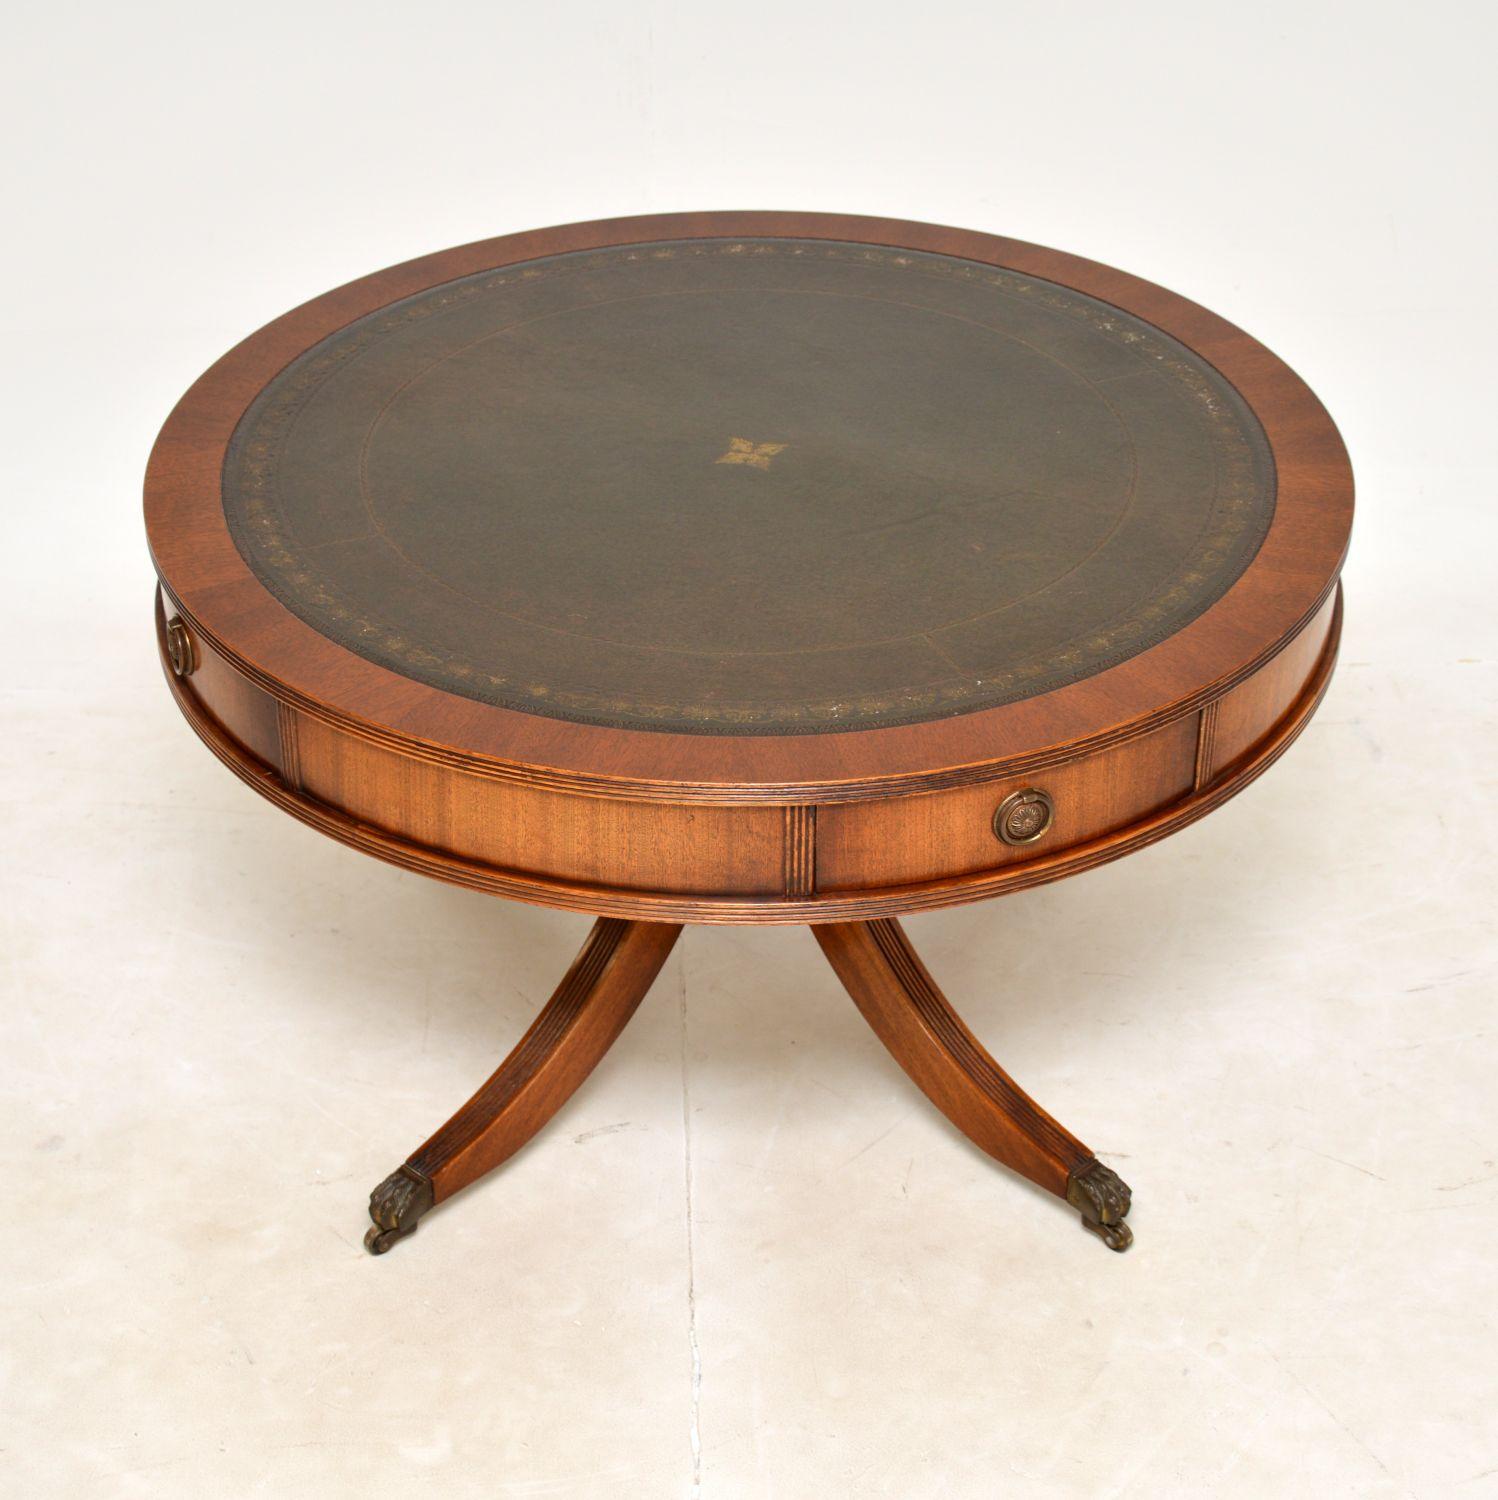 A large and impressive antique coffee table in the Regency style. This was made in England, it dates from around the 1930’s.

This is of superb quality, it is a great size and has four useful drawers built into the circular drum shaped top. The